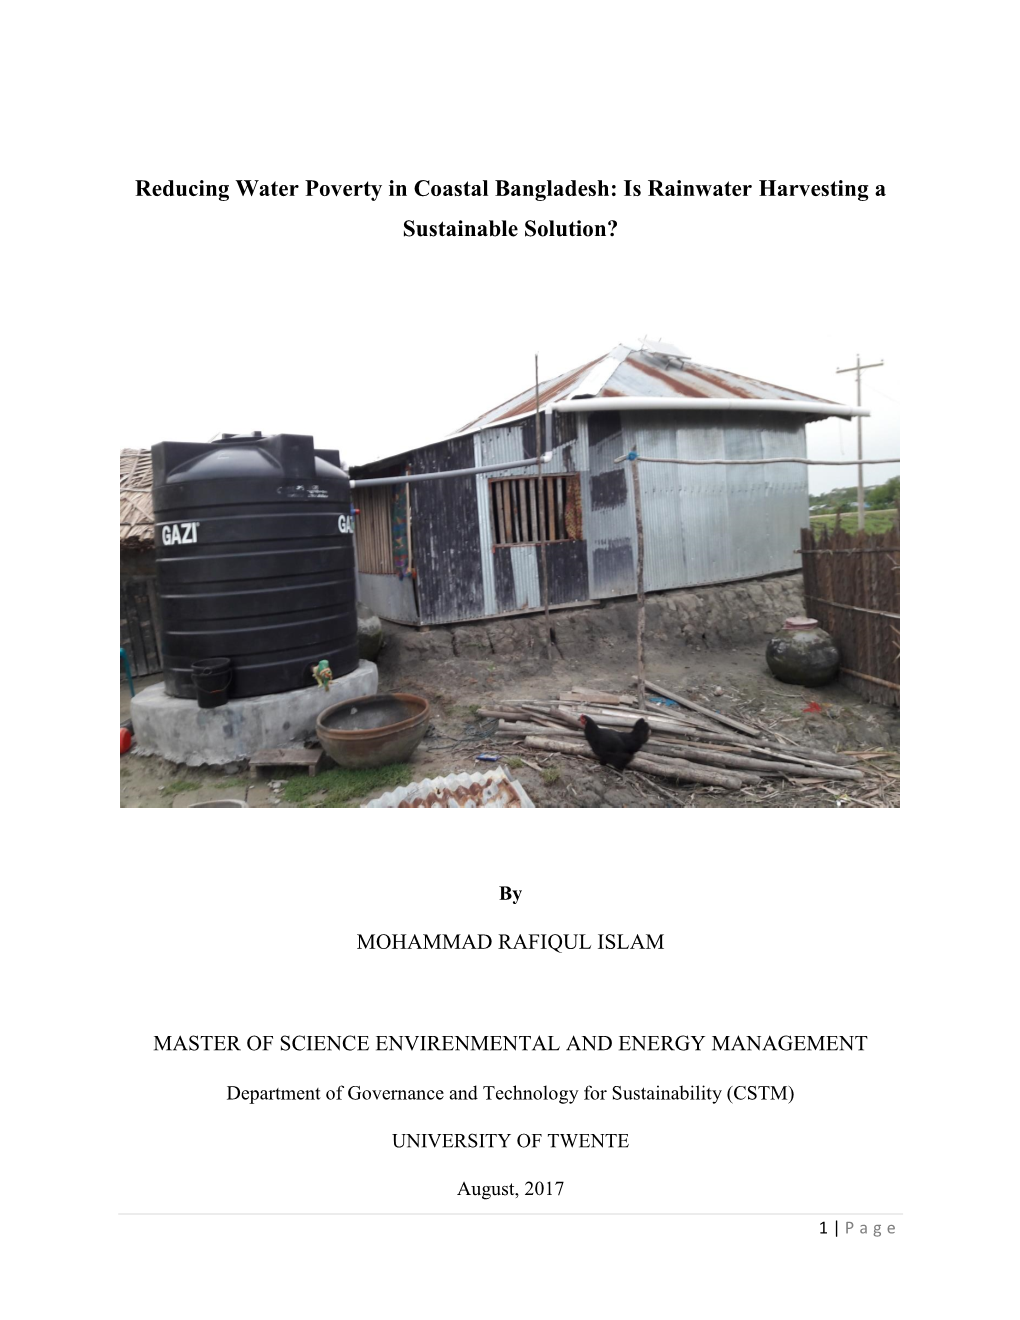 Reducing Water Poverty in Coastal Bangladesh: Is Rainwater Harvesting a Sustainable Solution?